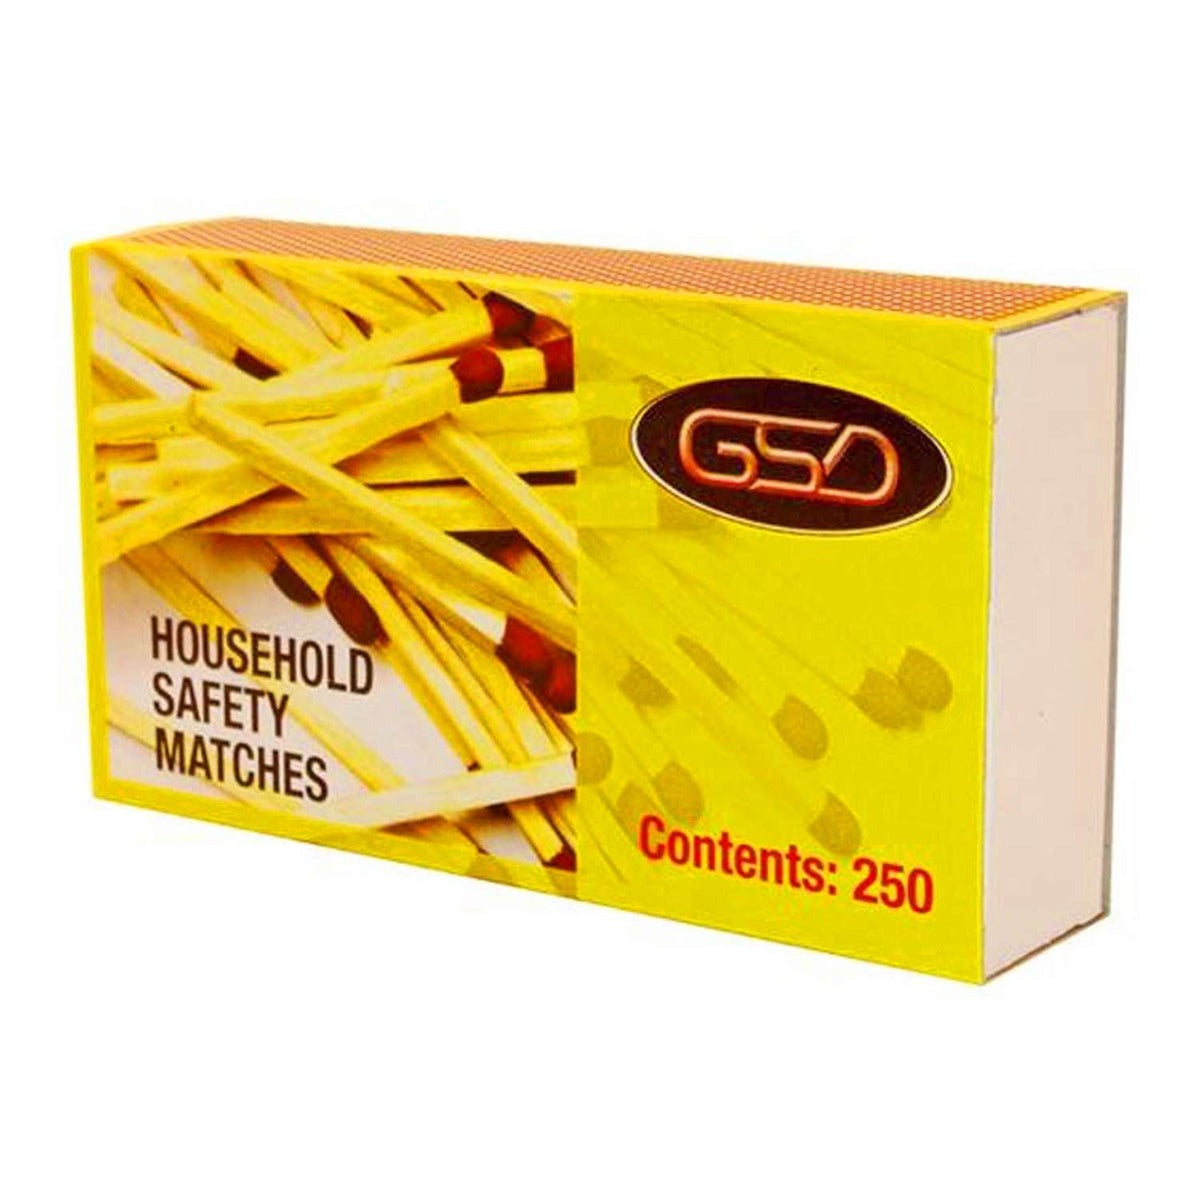 GSD - Household Safety Matches - 250 Sticks - Continental Food Store